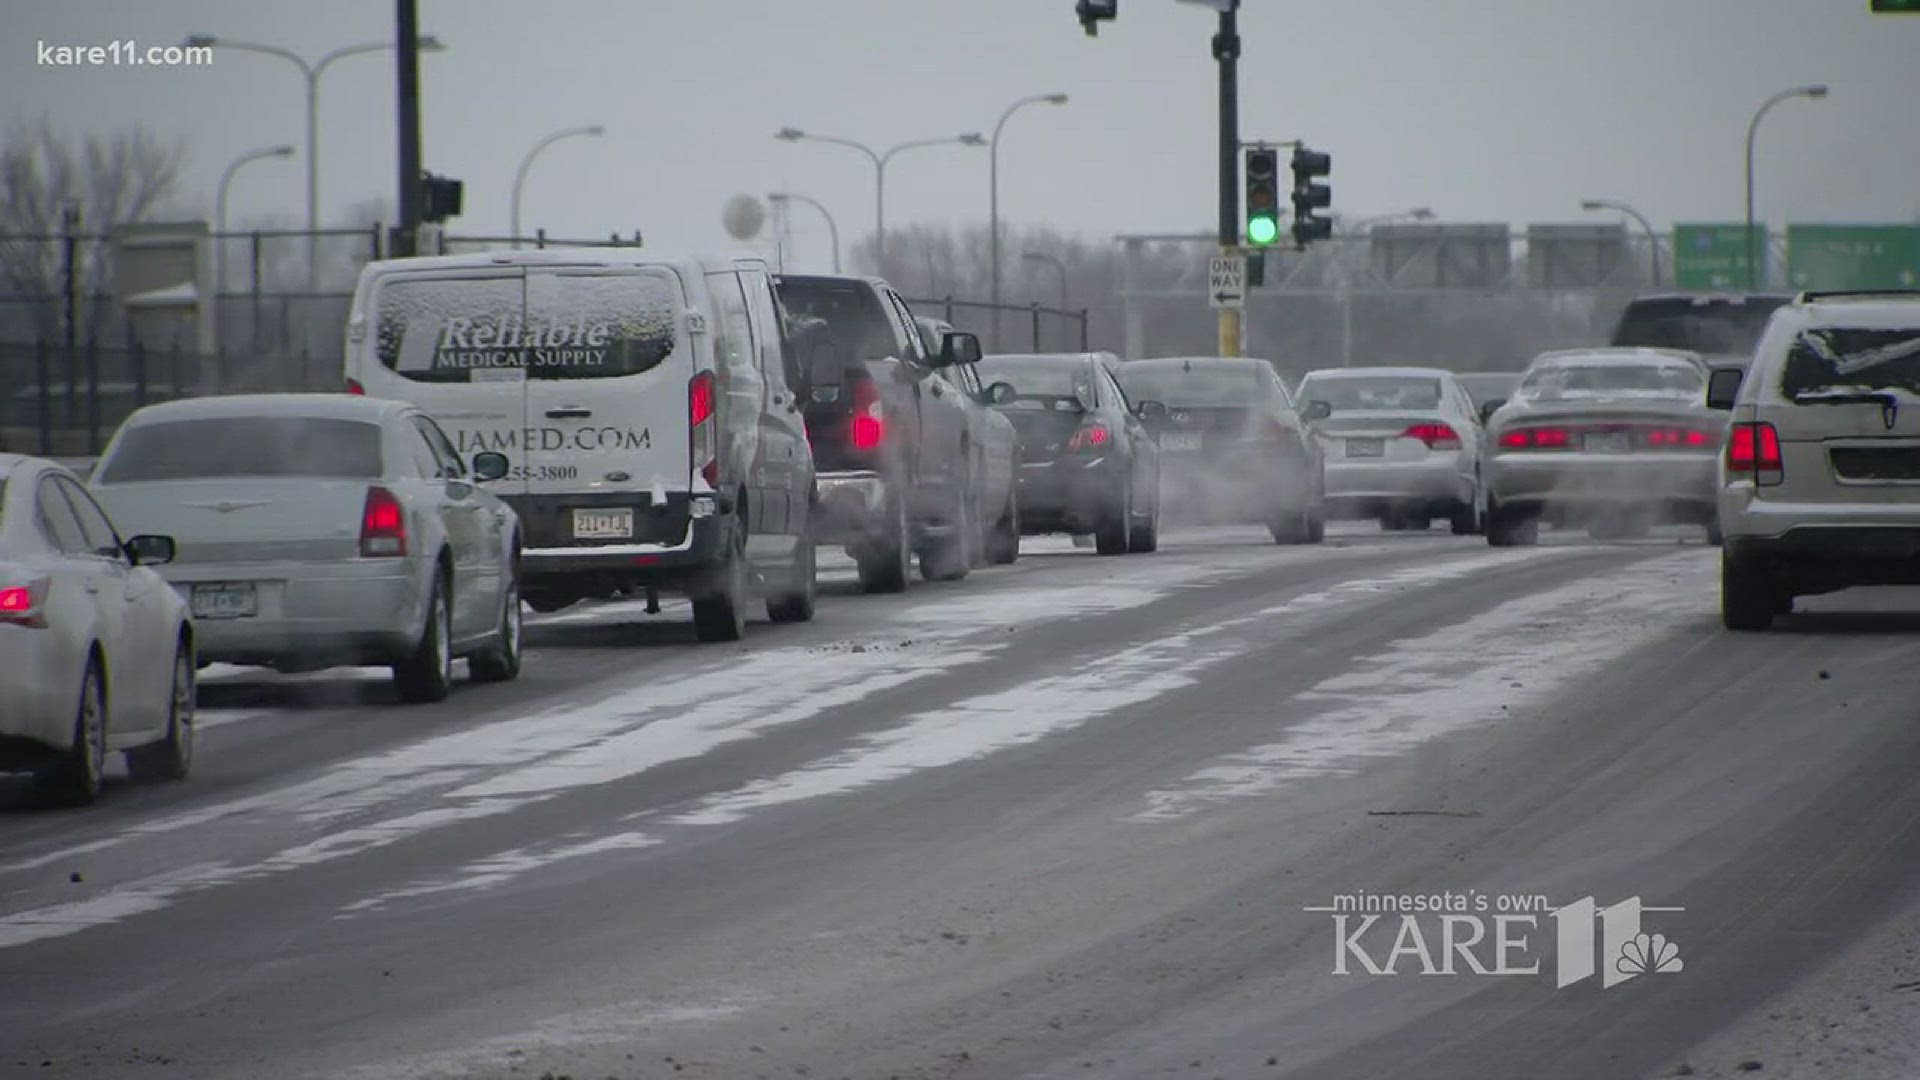 The Minnesota State patrol said from midnight to 5 p.m. on Saturday, there were 331 crashes in Minnesota -- 31 of those with injuries. And when it's this cold, MnDOT says salting the roads just doesn't work. http://kare11.tv/2BZmRU2